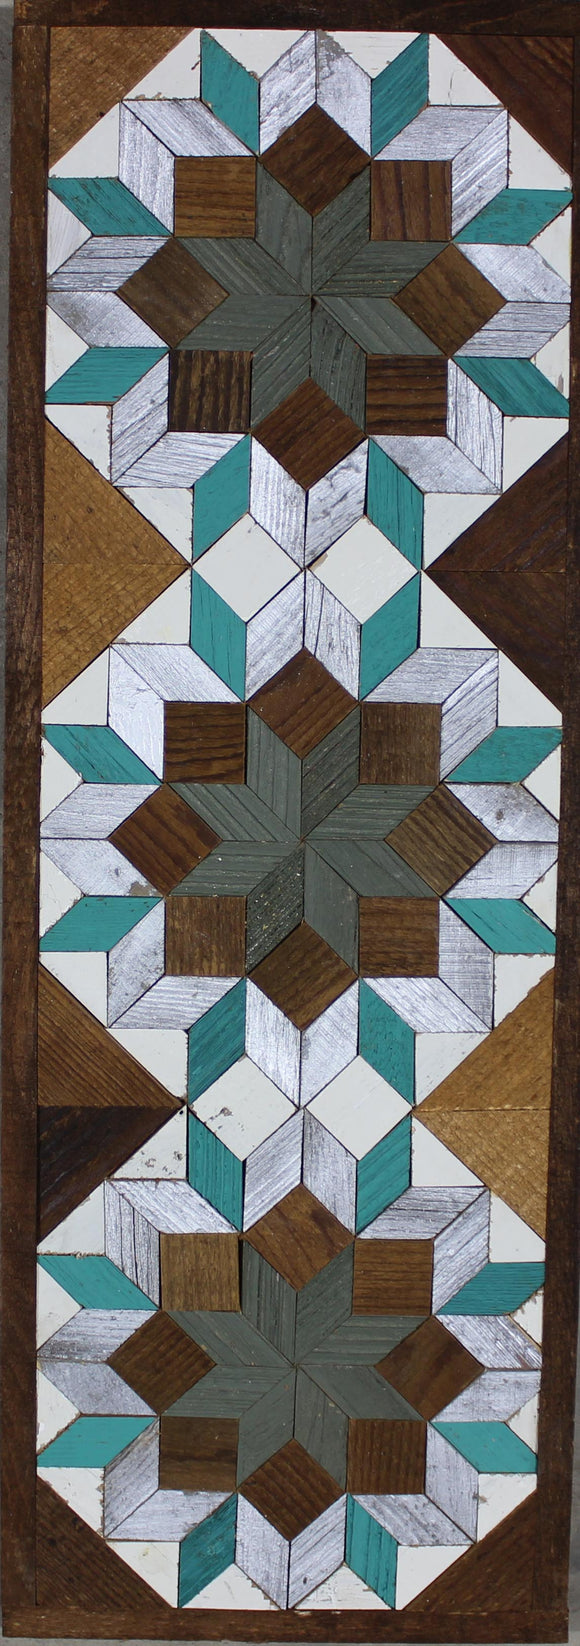 Amish Barn Quilt Wall Art, 30 by 10.5 Sage Green and Silver Flower